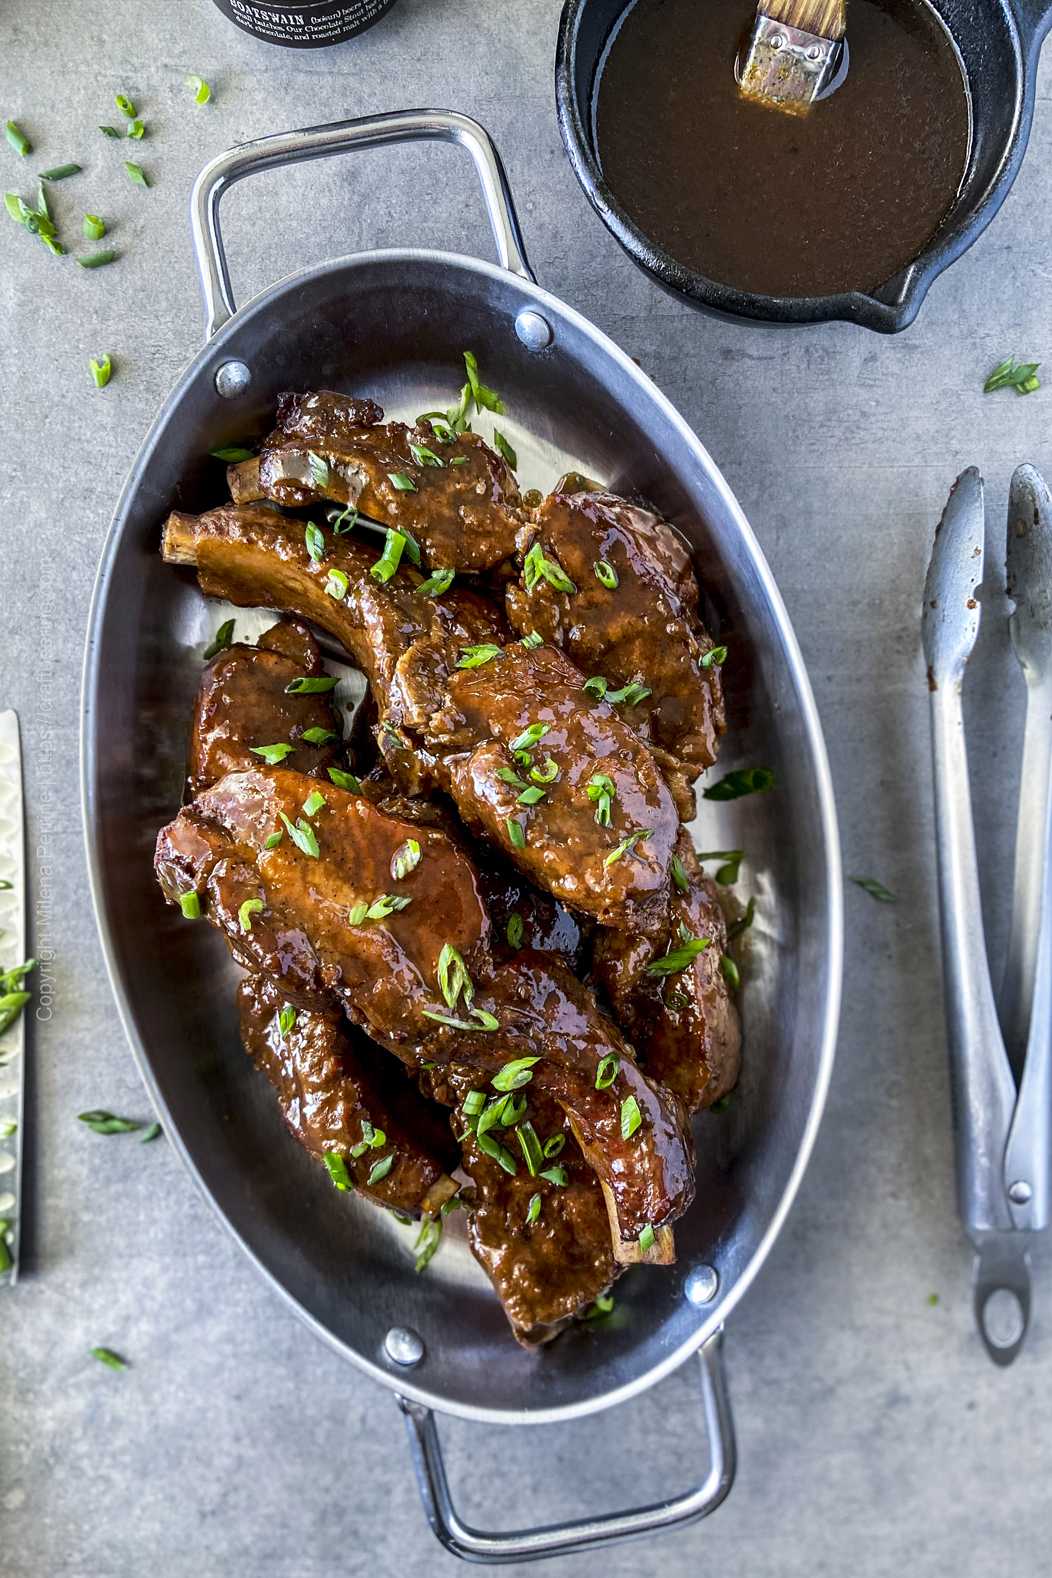 Country style ribs beer braised to tender perfection